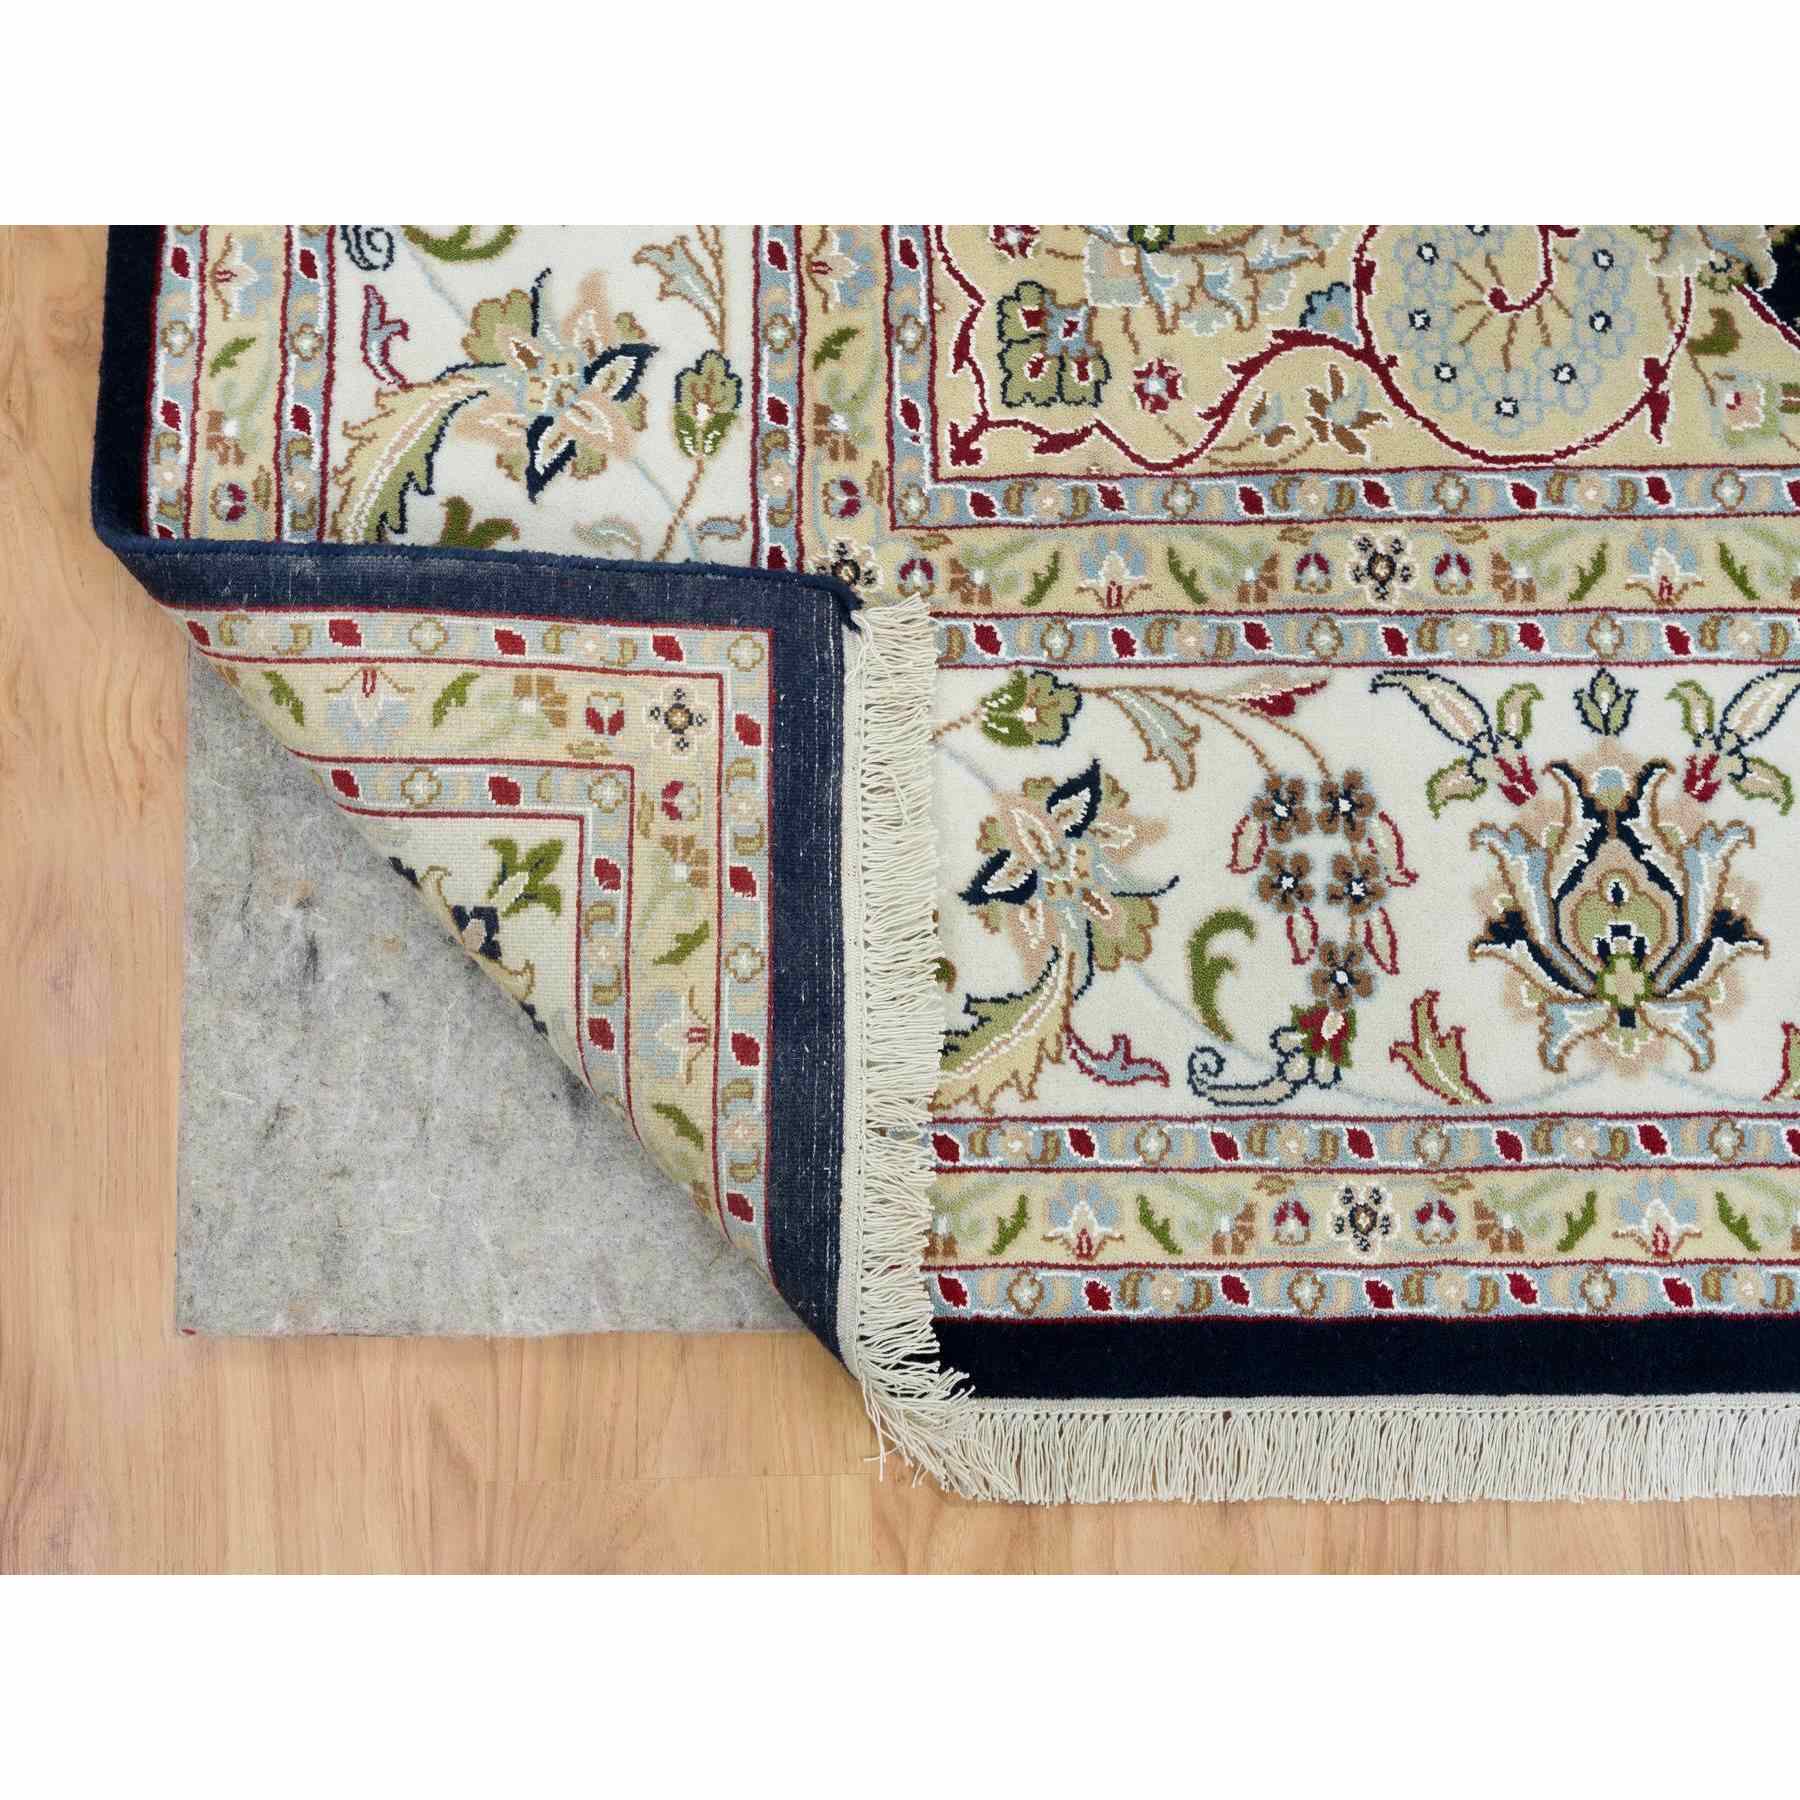 Fine-Oriental-Hand-Knotted-Rug-327020